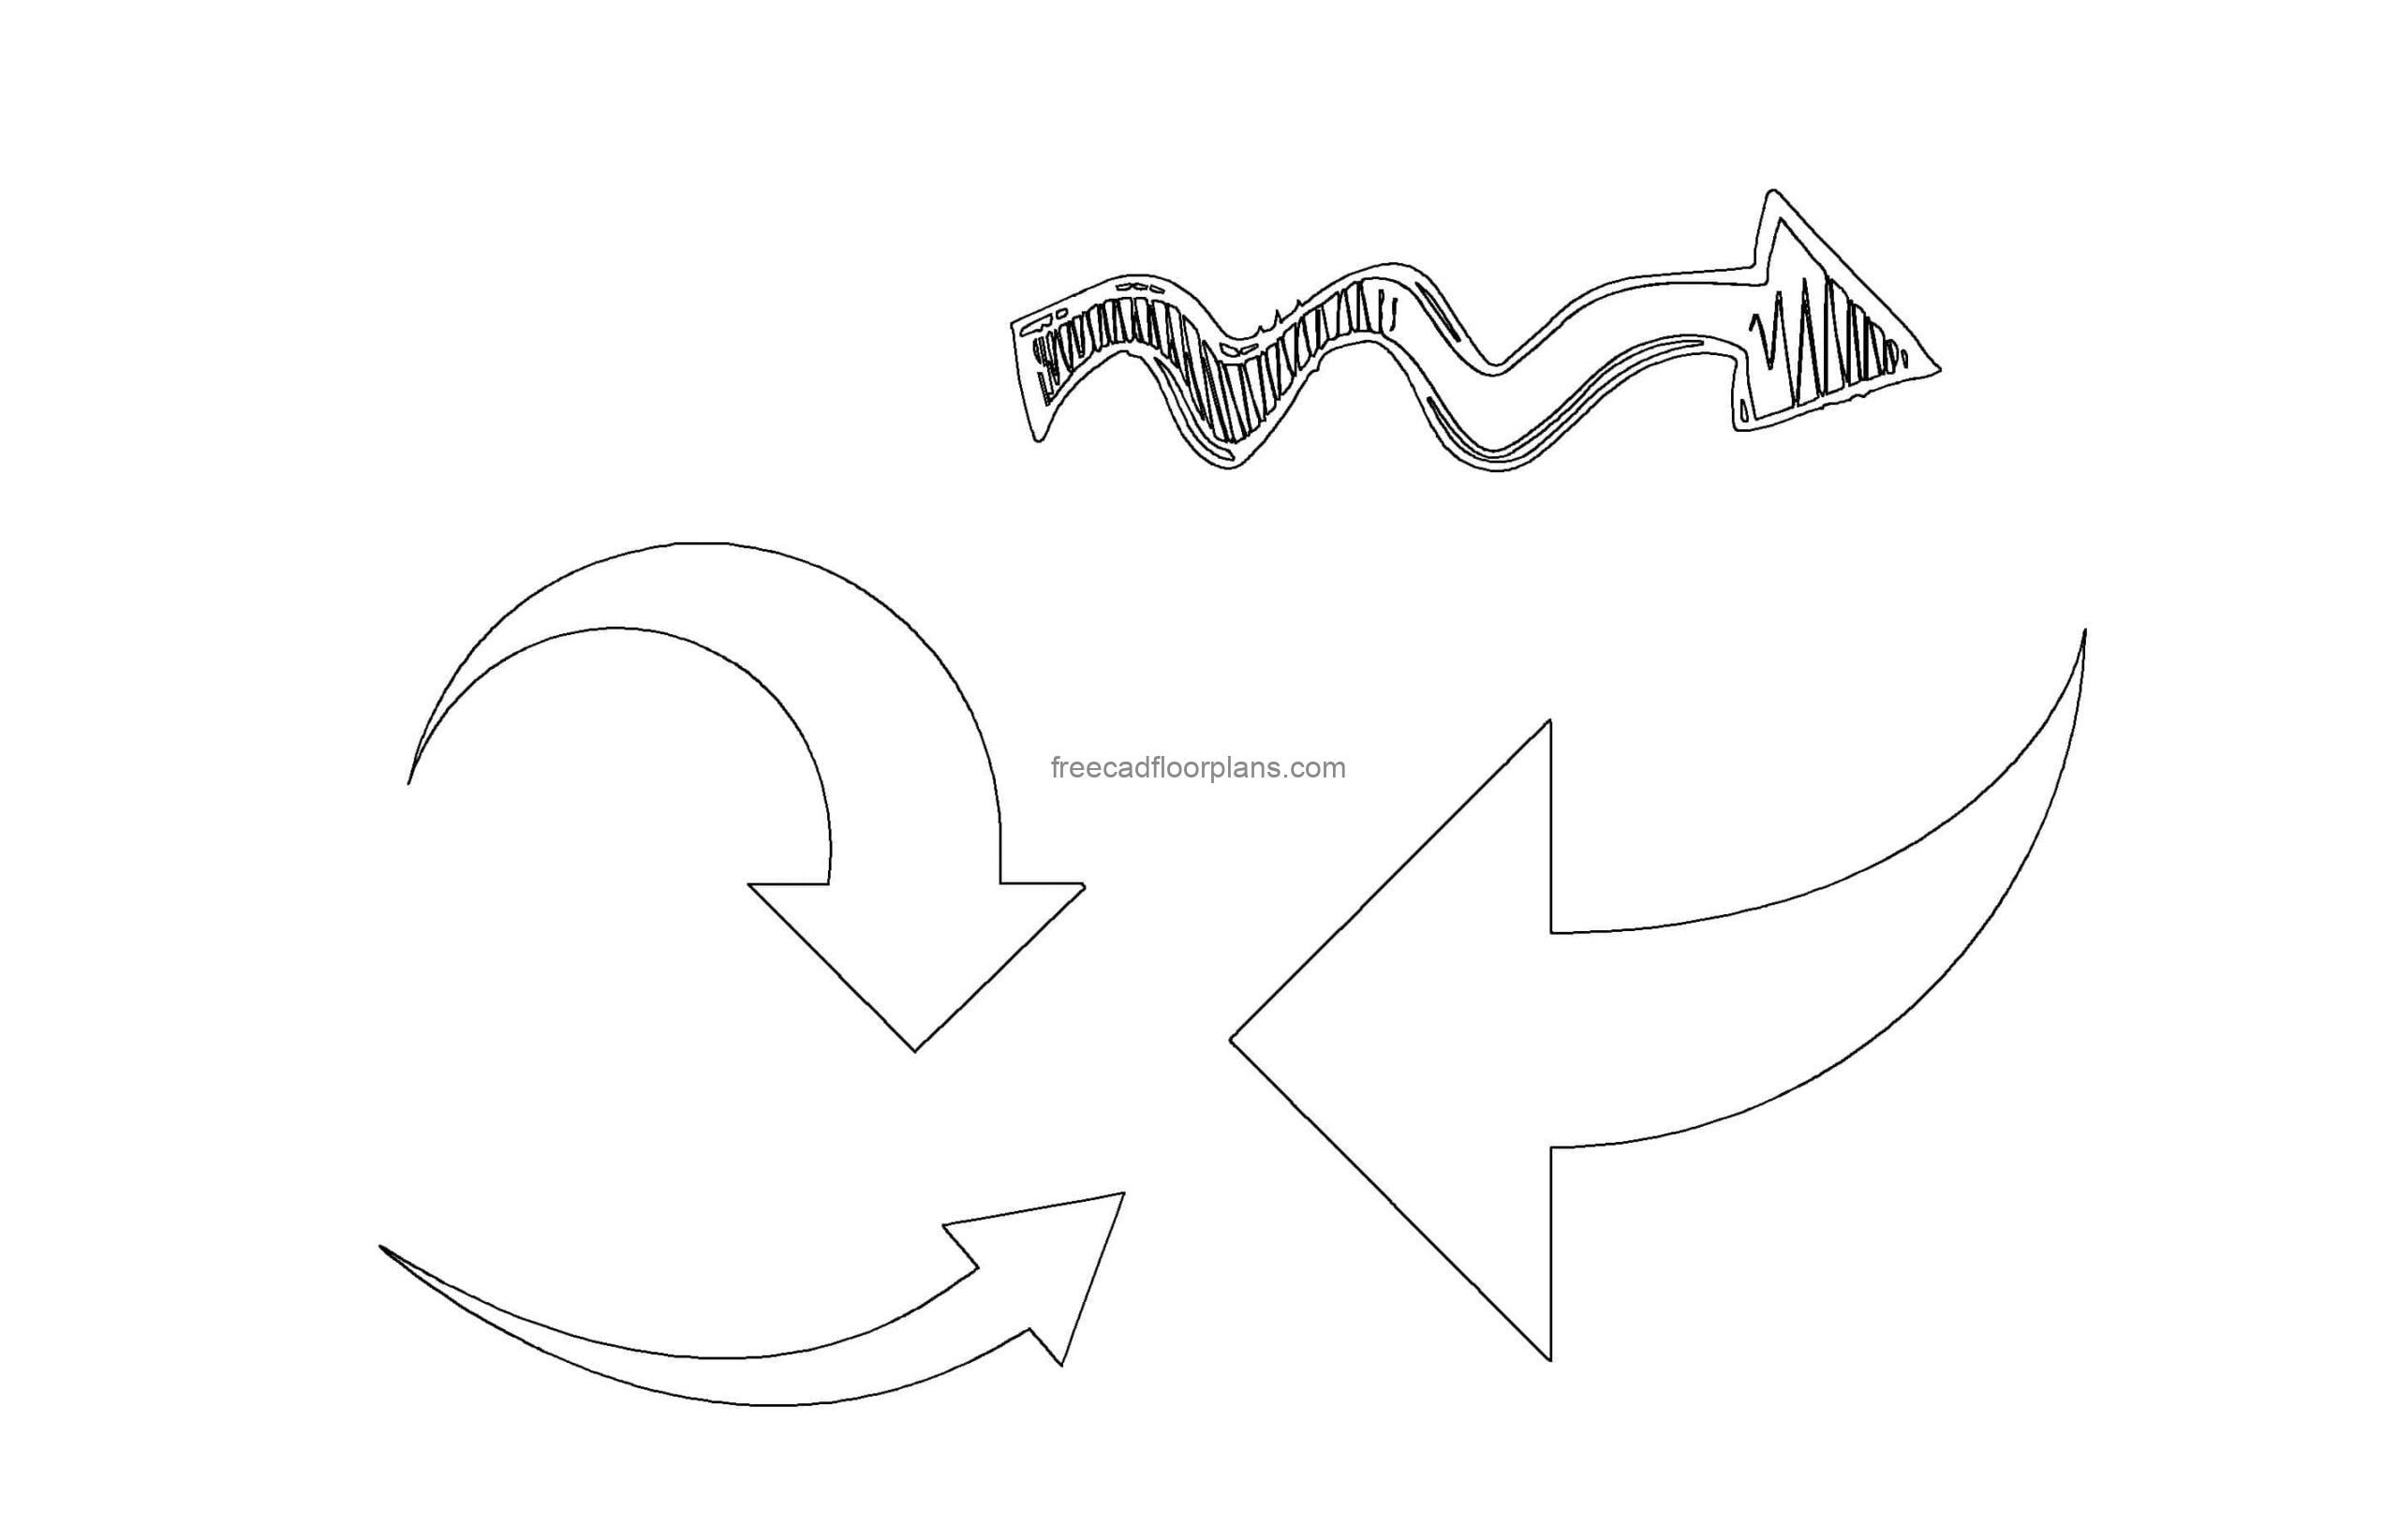 dwg cad block drawing of different curved arrows, 2d views, dwg file for free download